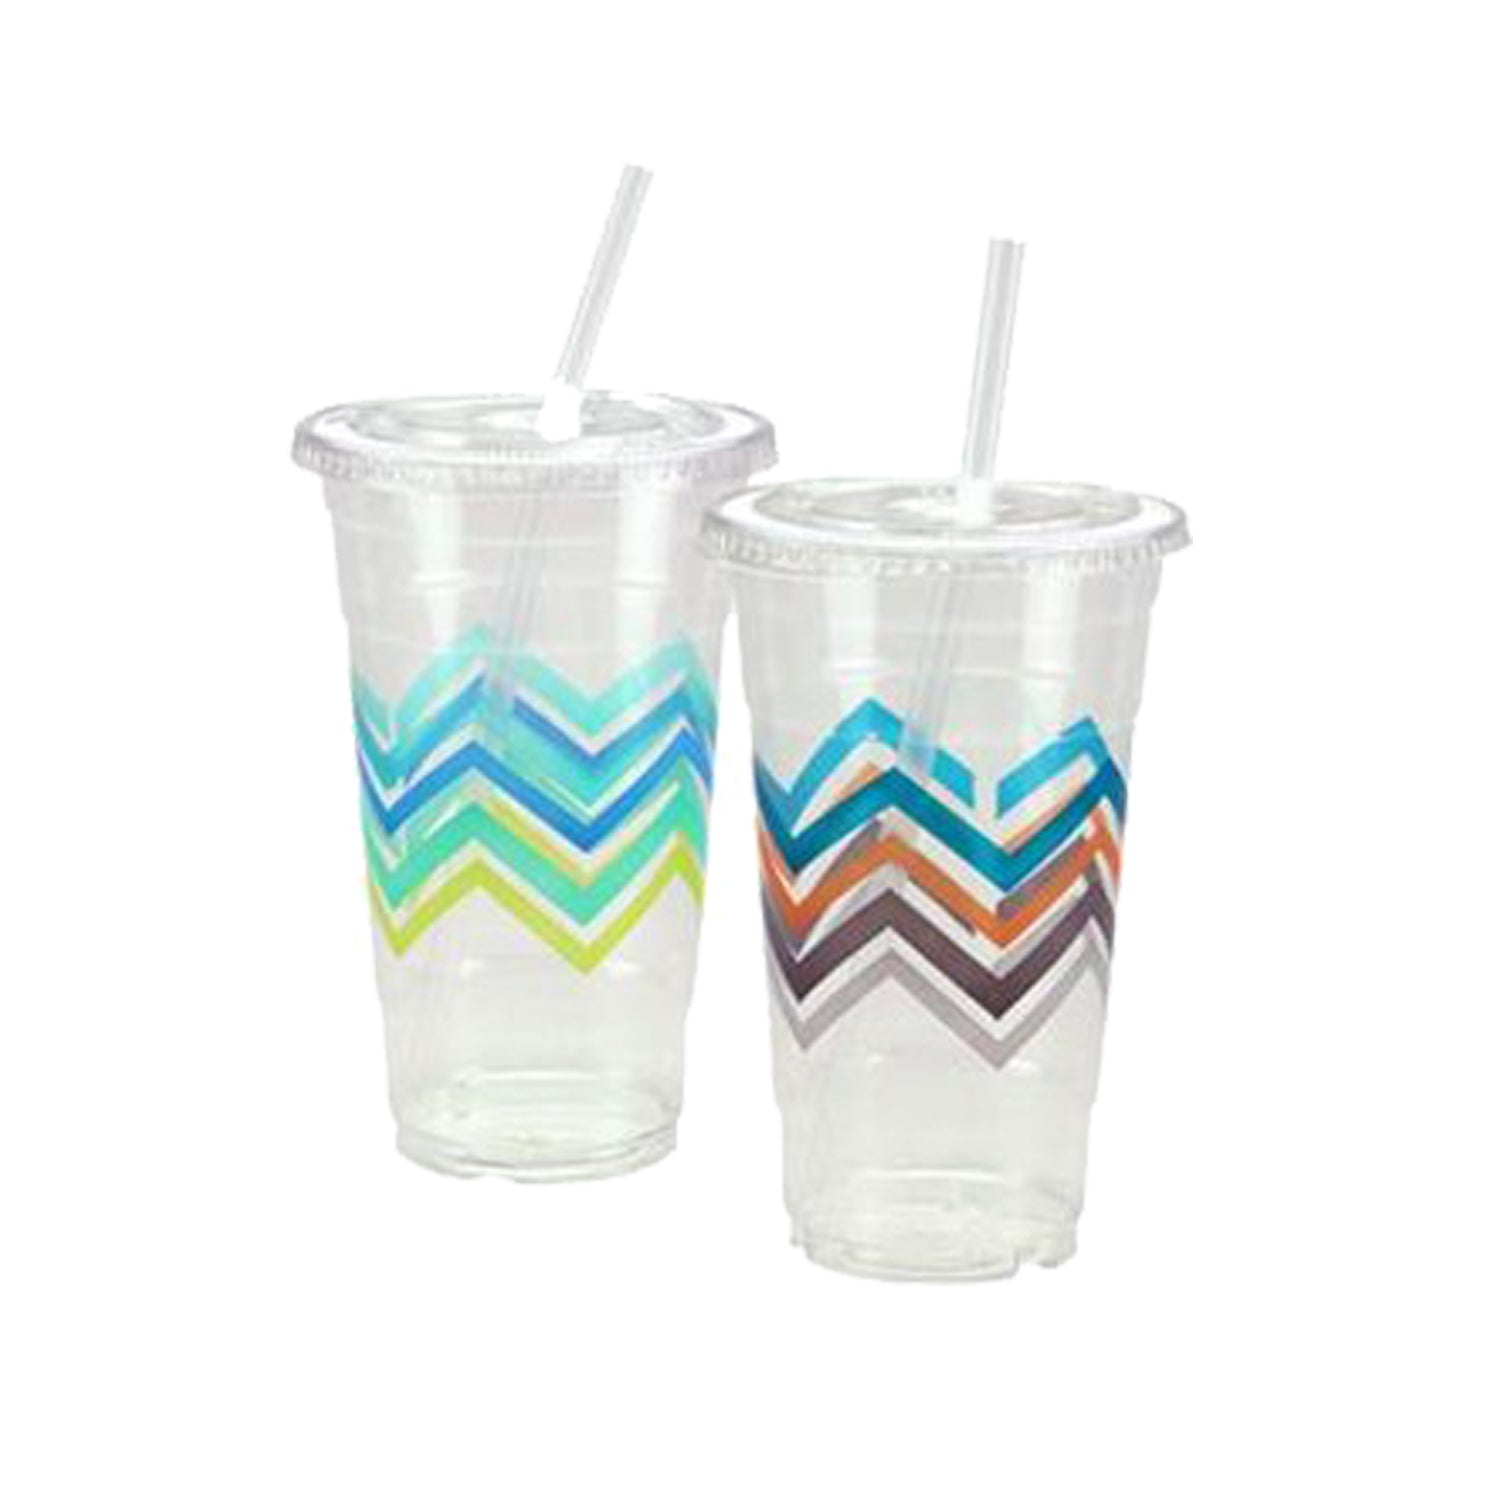 Nicole Home Collection Premium Plastic Chevron Cups with Lids and Straws 24 oz - 10 Pack